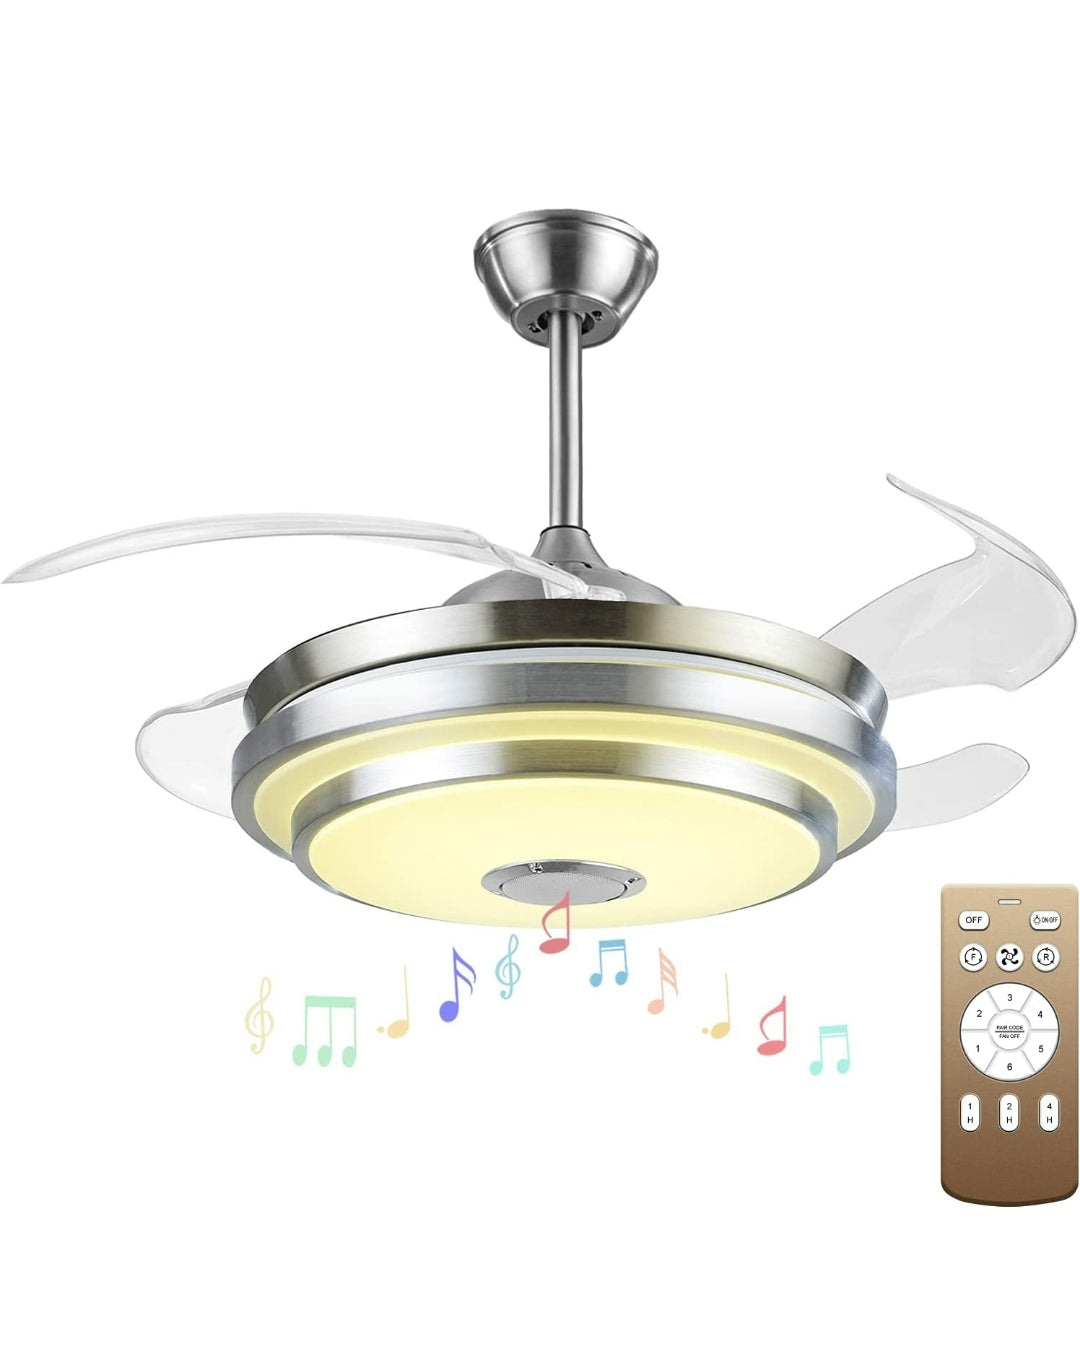 Modern and Fashion Retractable Chandelier Ceiling Fan Indoor Light Dimmable LED Lights Silver for Home Decor, Plus Bluetooth Speaker to Adjust Light Color and Speed